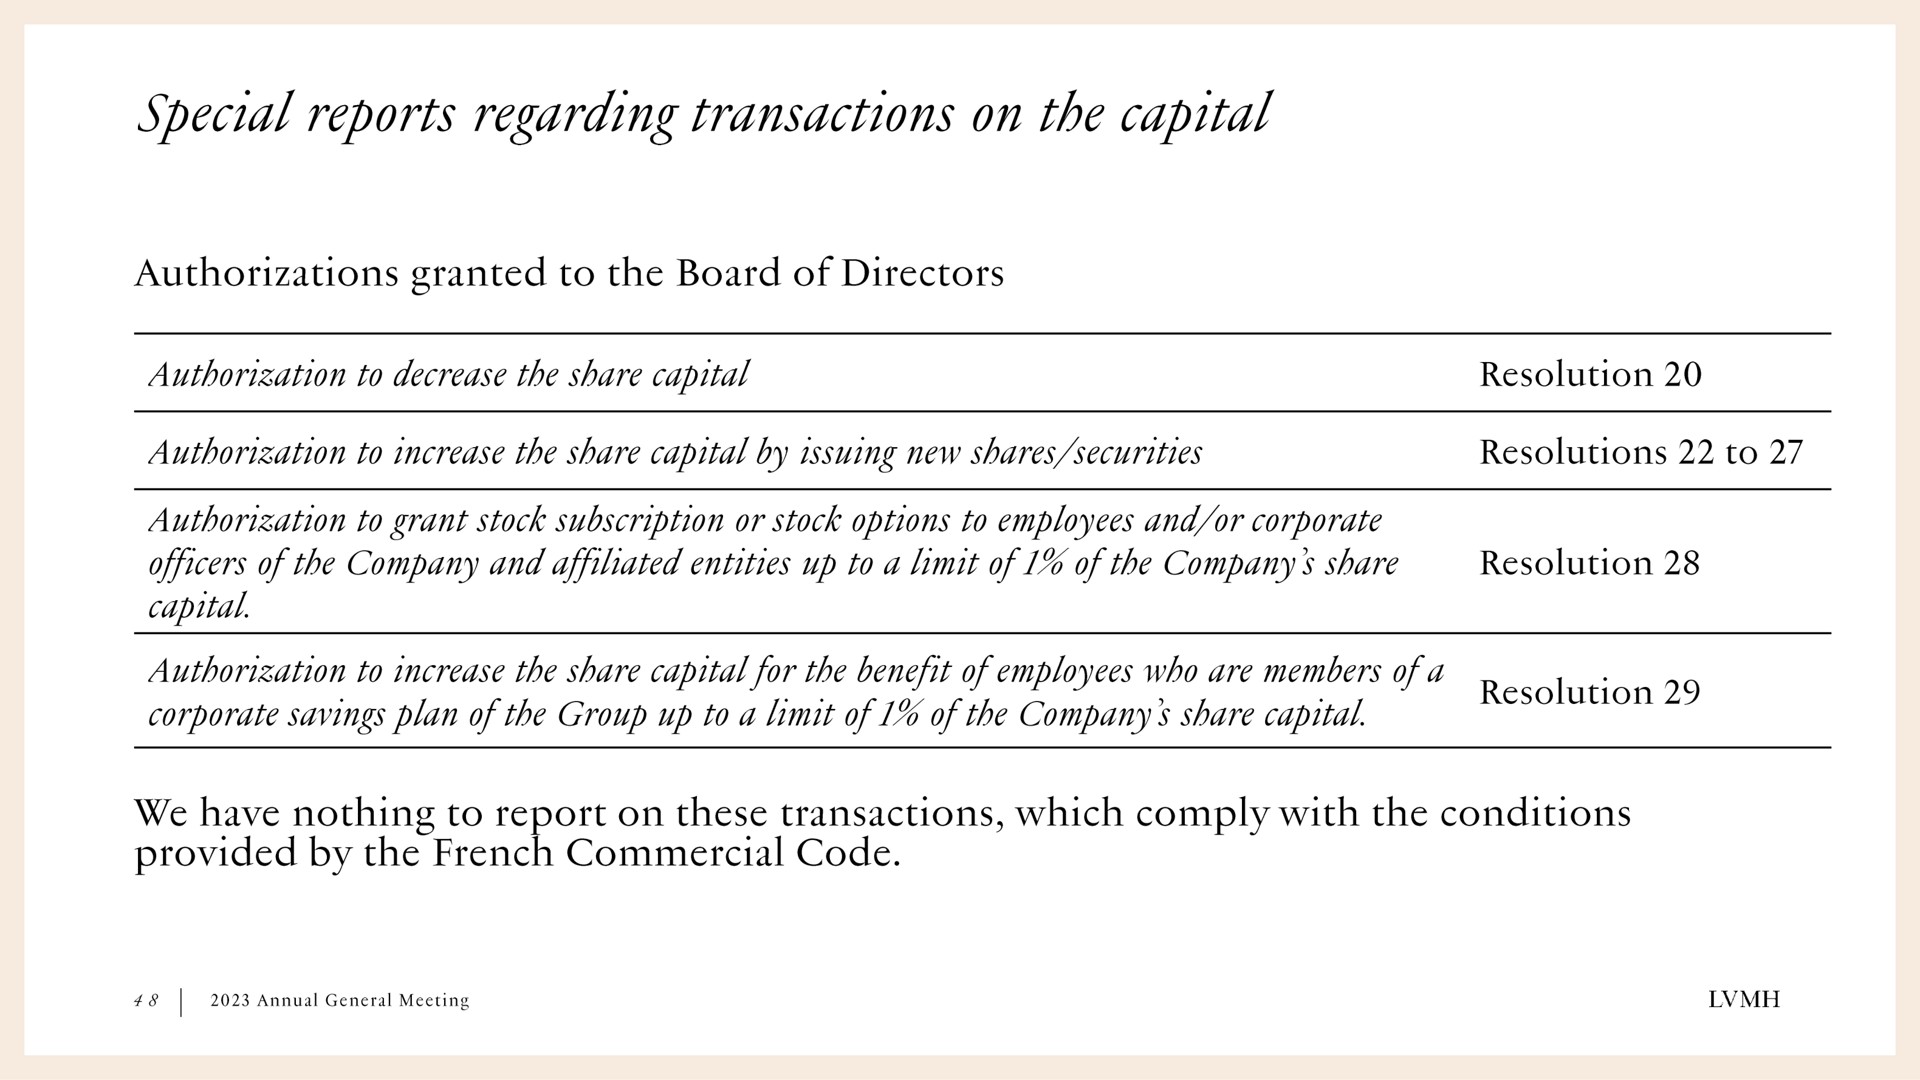 special reports regarding transactions on the capital | LVMH